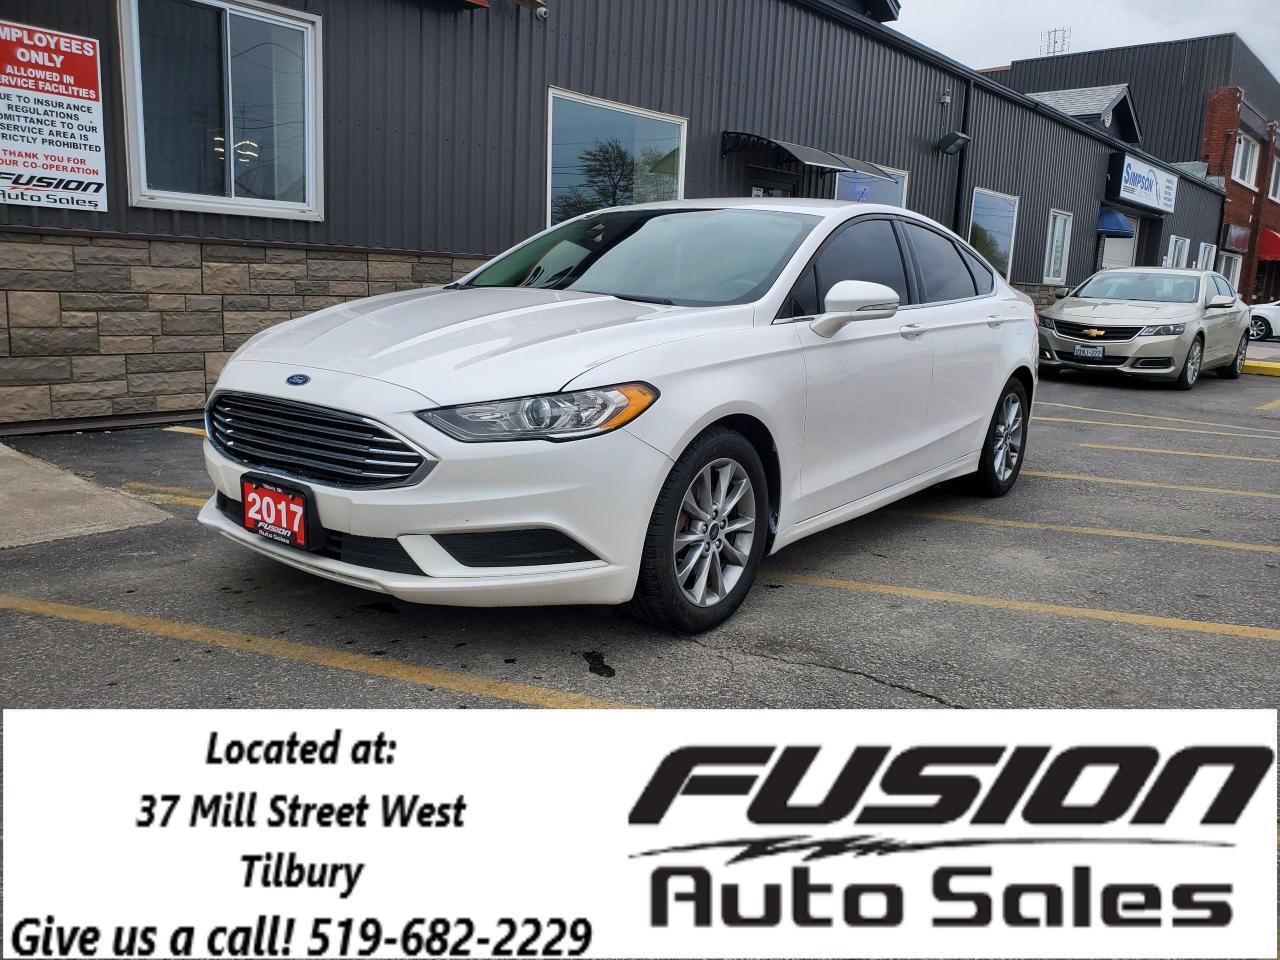 2017 Ford Fusion SE-NO HST TO A MAX OF $2000 LTD TIME ONLY